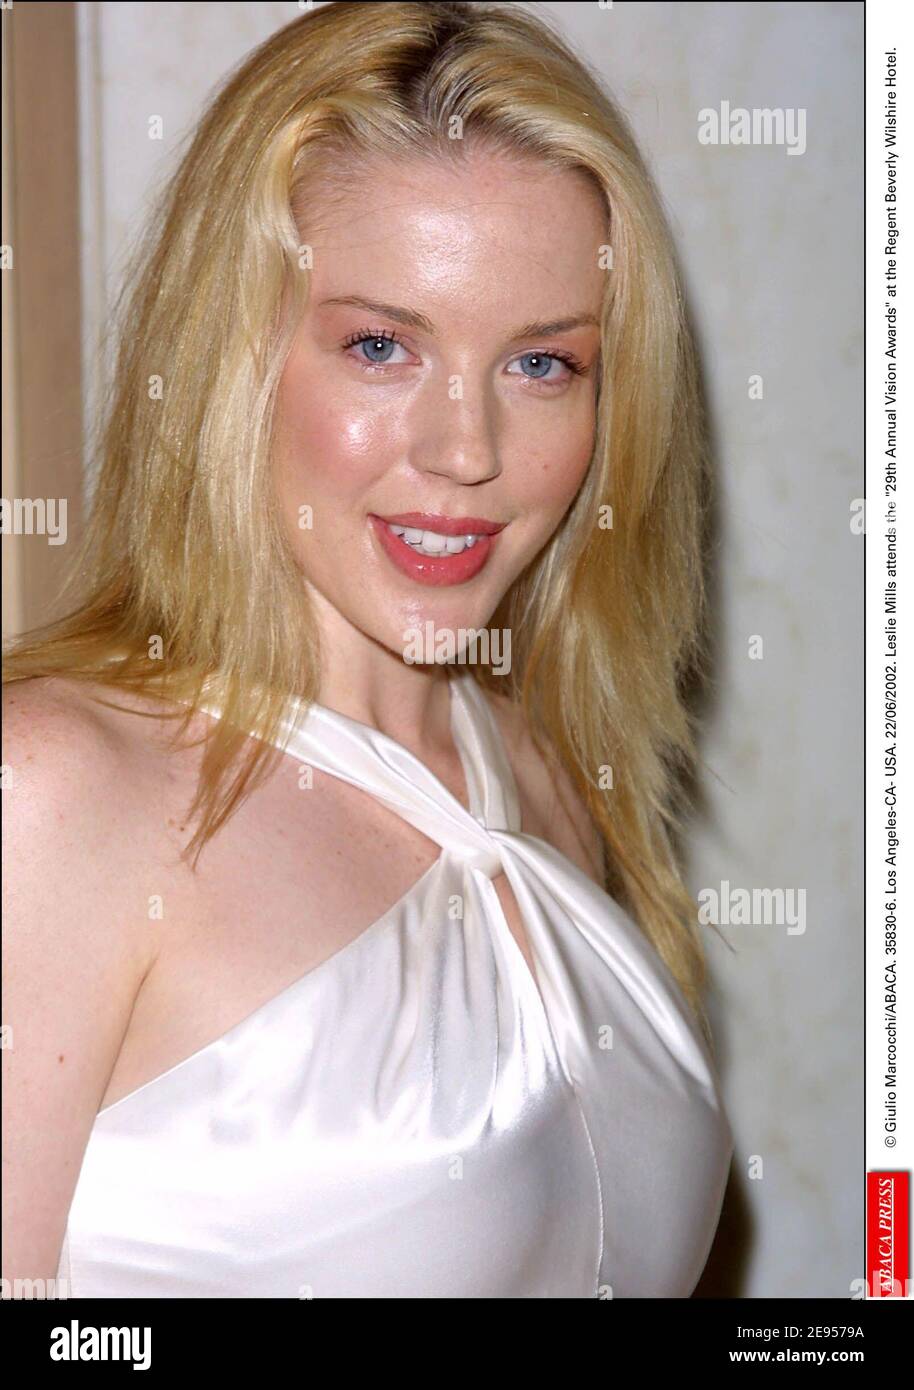 © Giulio Marcocchi/ABACA. 35830-6. Los Angeles-CA- USA. 22/06/2002. Leslie Mills attends the 29th Annual Vision Awards at the Regent Beverly Wilshire Hotel. Stock Photo